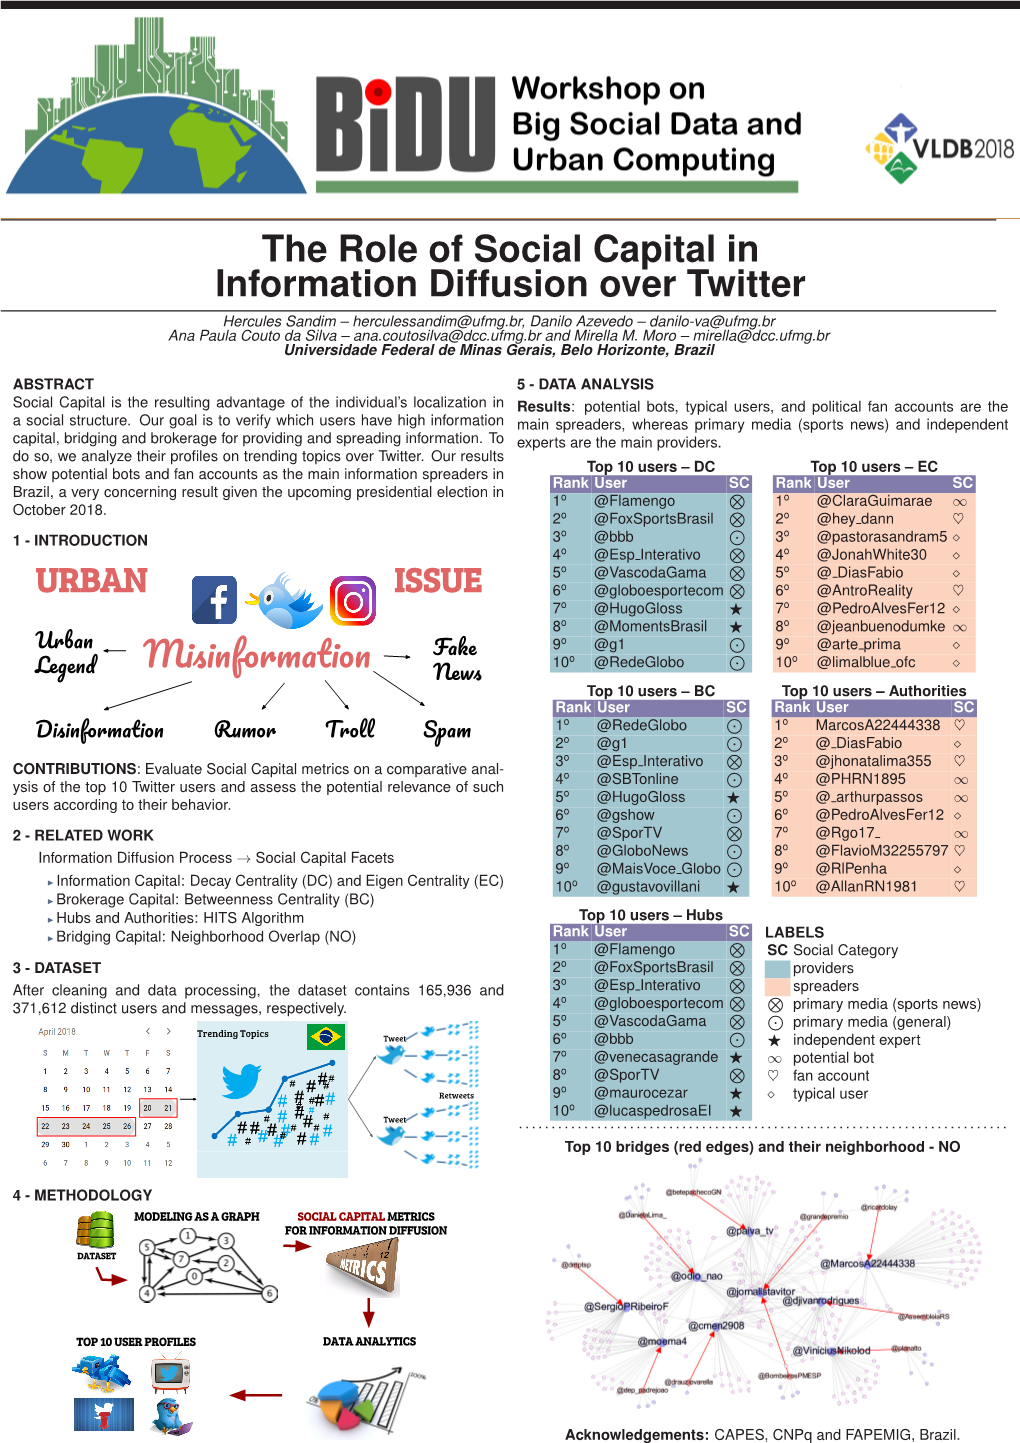 The Role of Social Capital in Information Diffusion Over Twitter